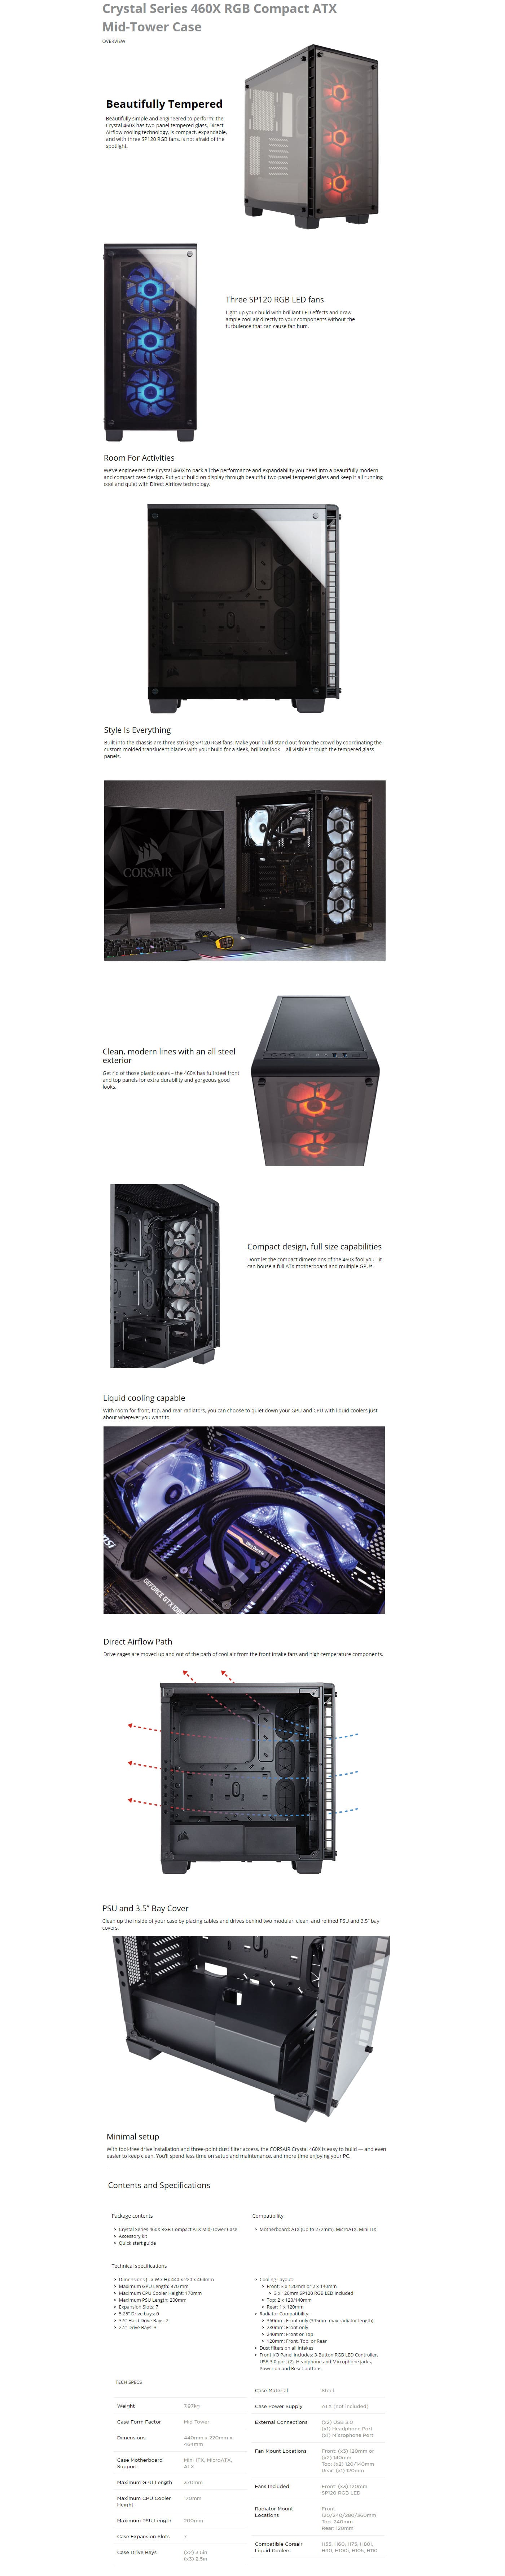 Corsair Crystal Series 460X RGB Compact ATX Mid-Tower Case features